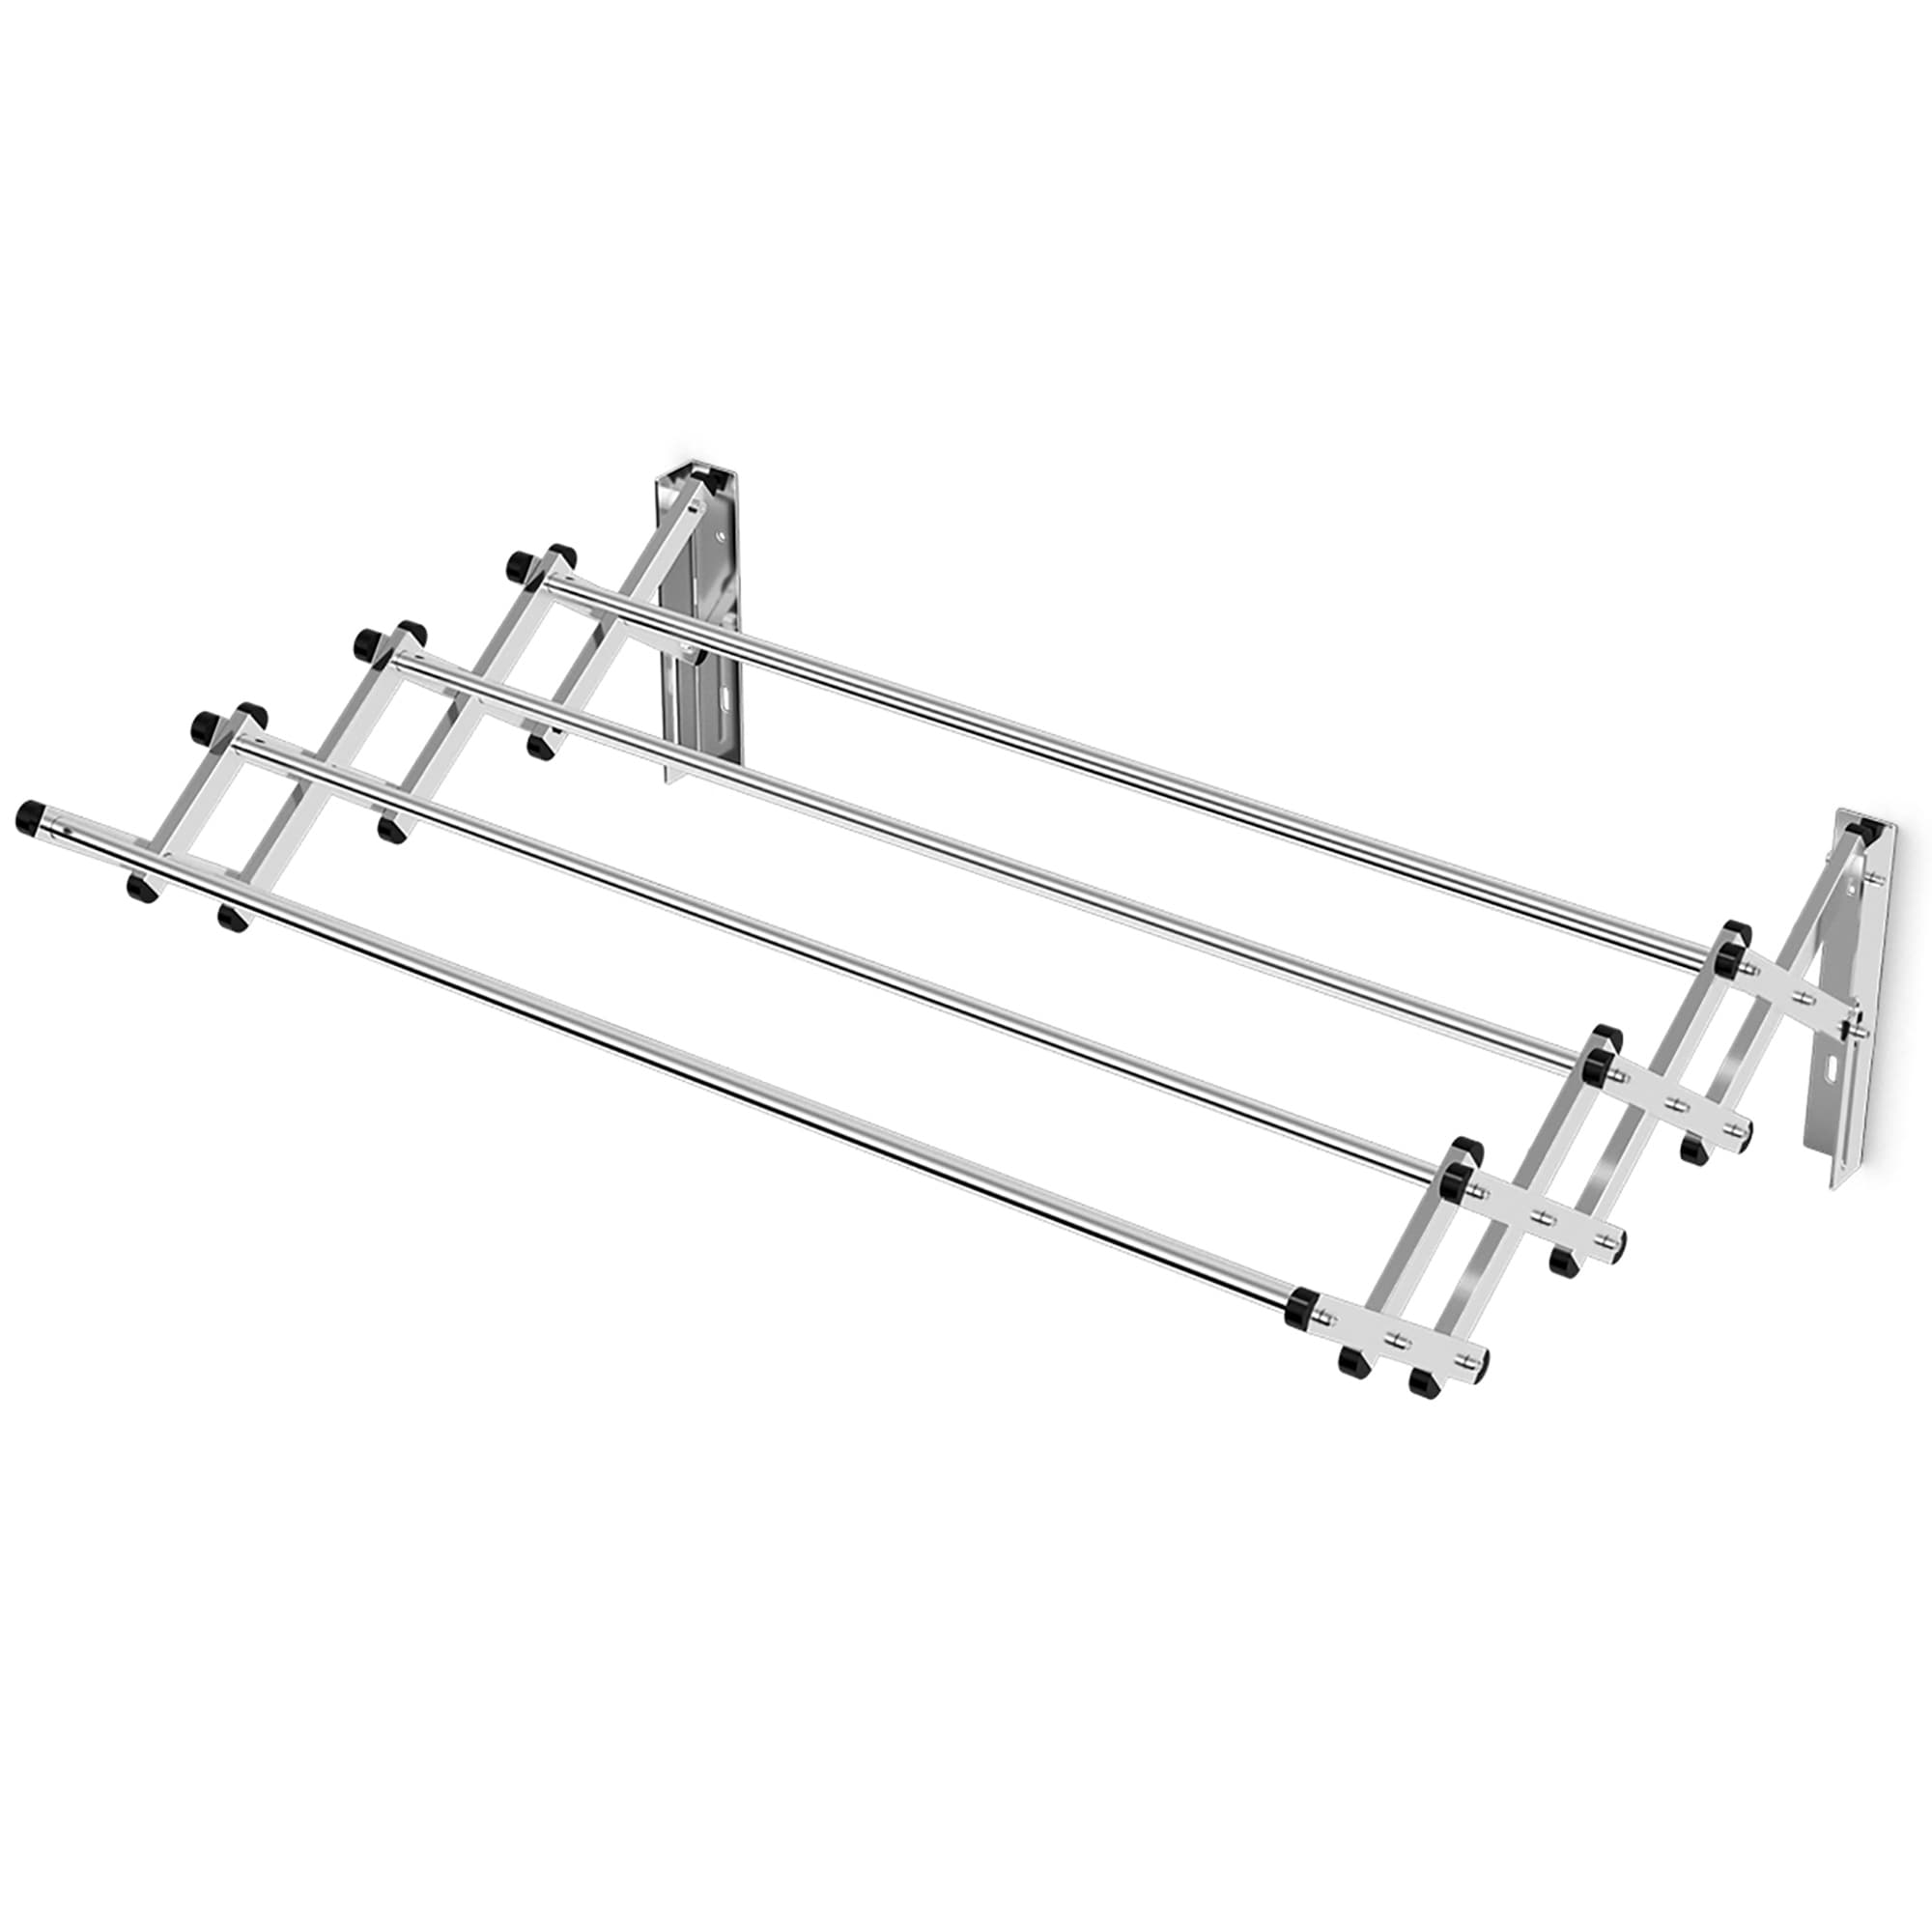 https://ak1.ostkcdn.com/images/products/is/images/direct/f5fceed00c6d8b92ecb844fb0bc497d8fa75a18e/Wall-Mounted-Stainless-Towel-Rack-Expandable-Drying-Stand.jpg